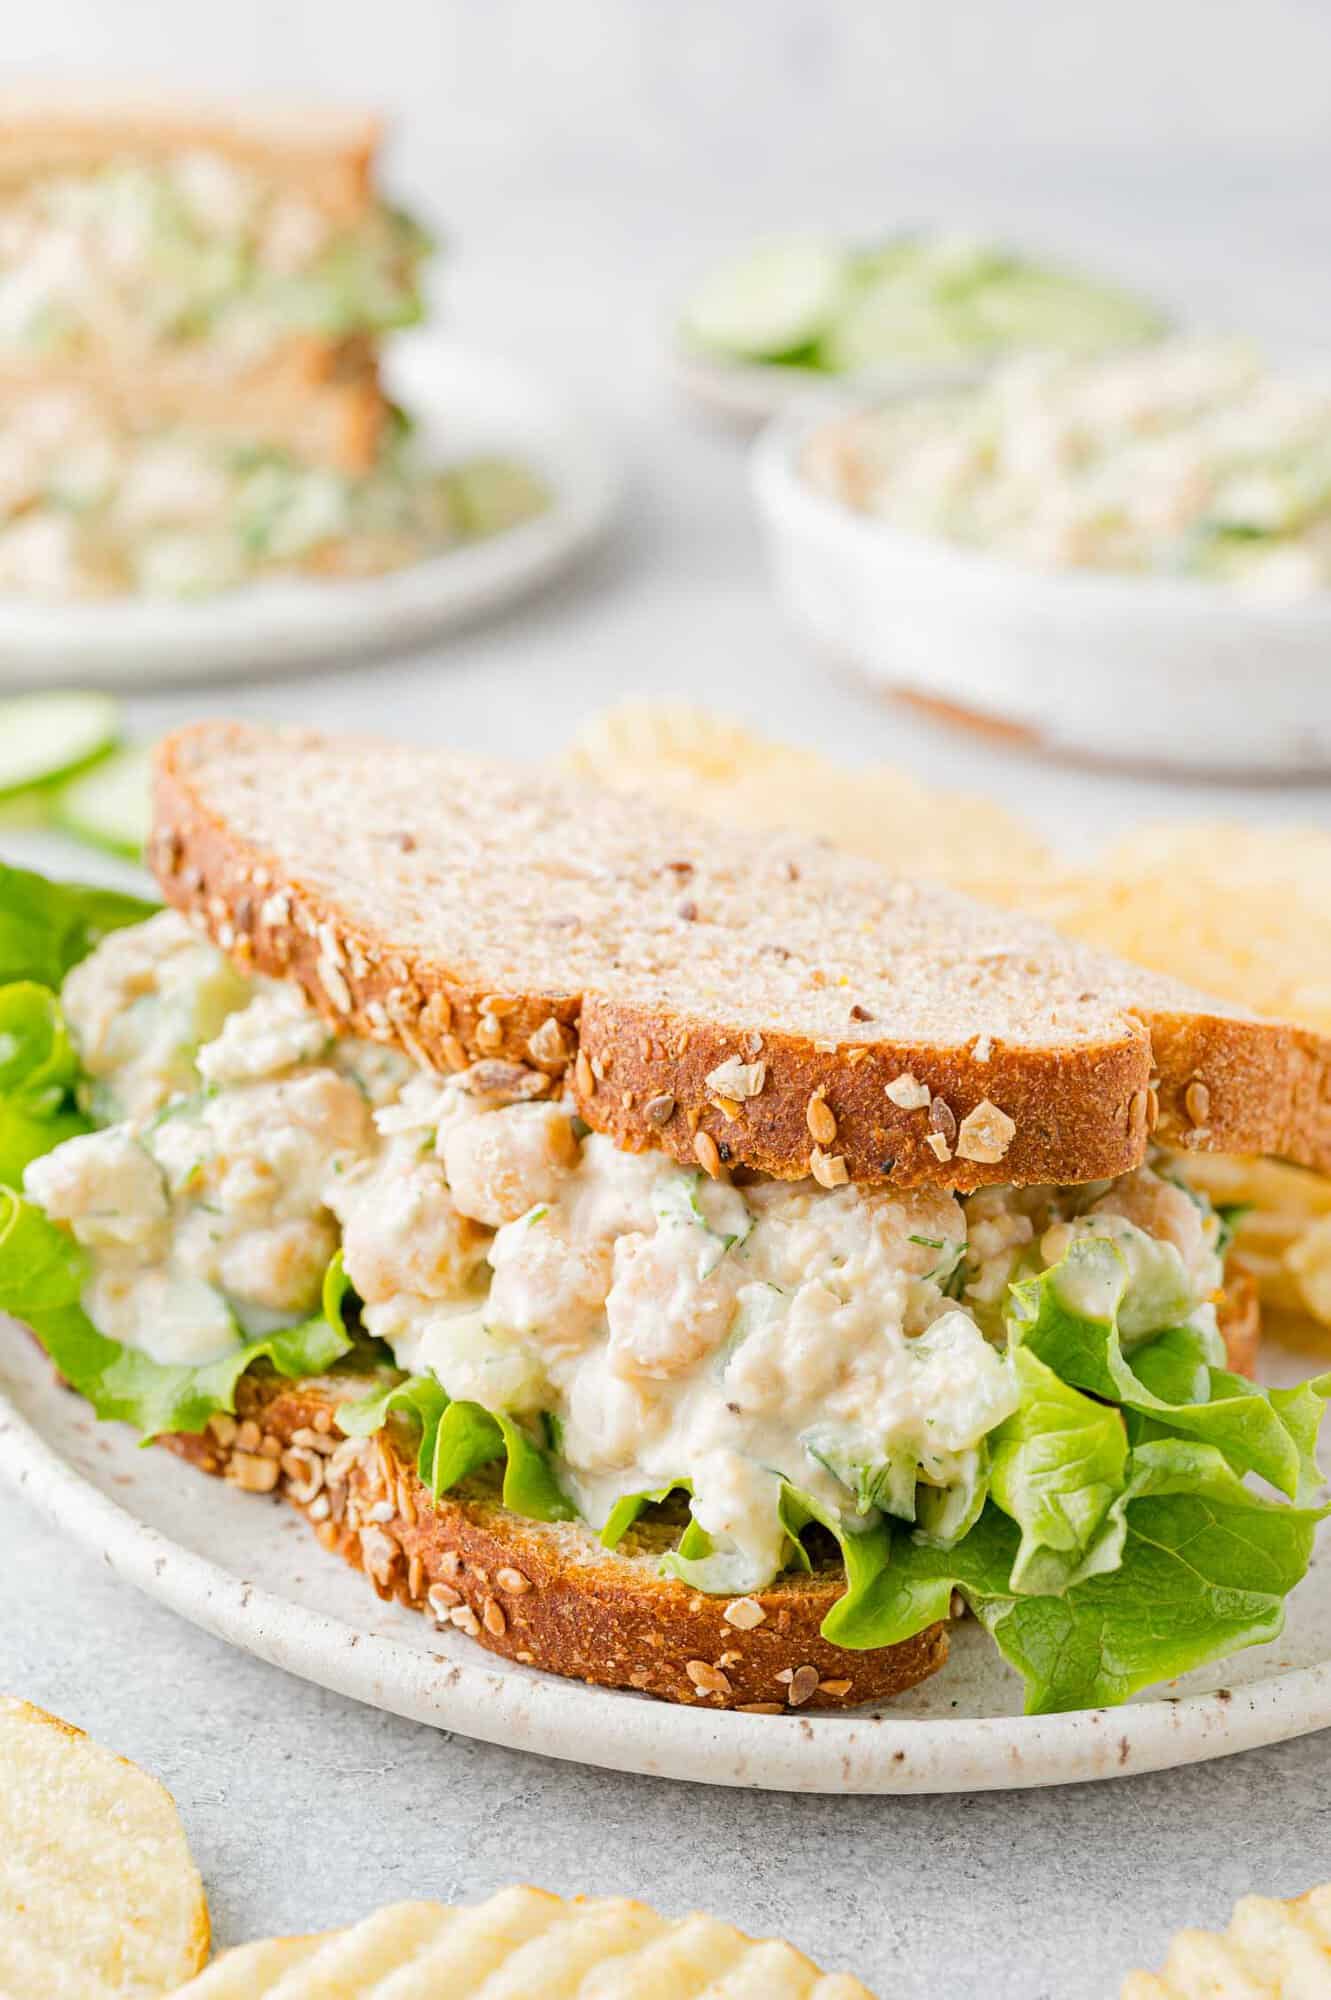 Chickpea salad sandwich on wheat bread with leaf lettuce.